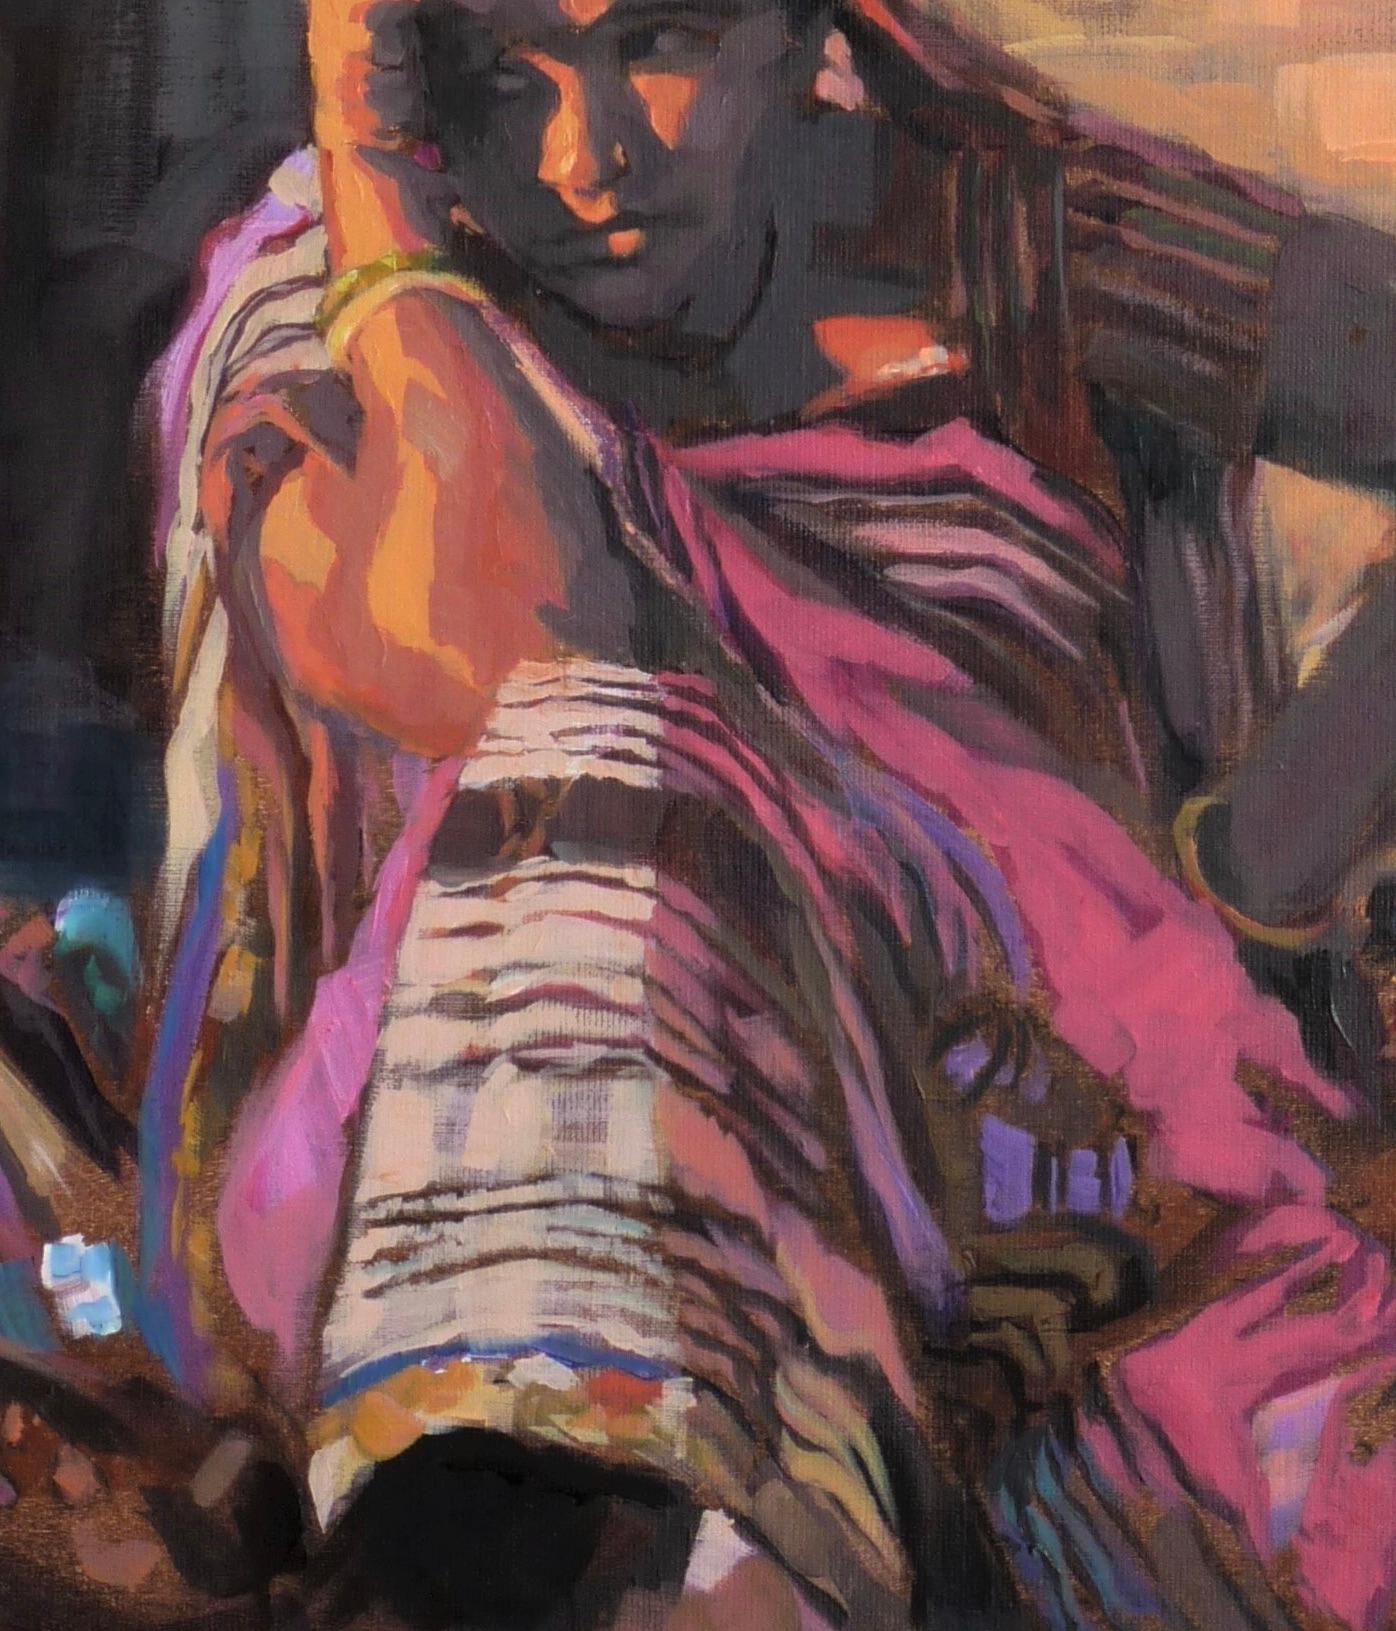 Magenta- 21st Century Painting of a colorful woman in India - Black Portrait Painting by Mitzy Renooy